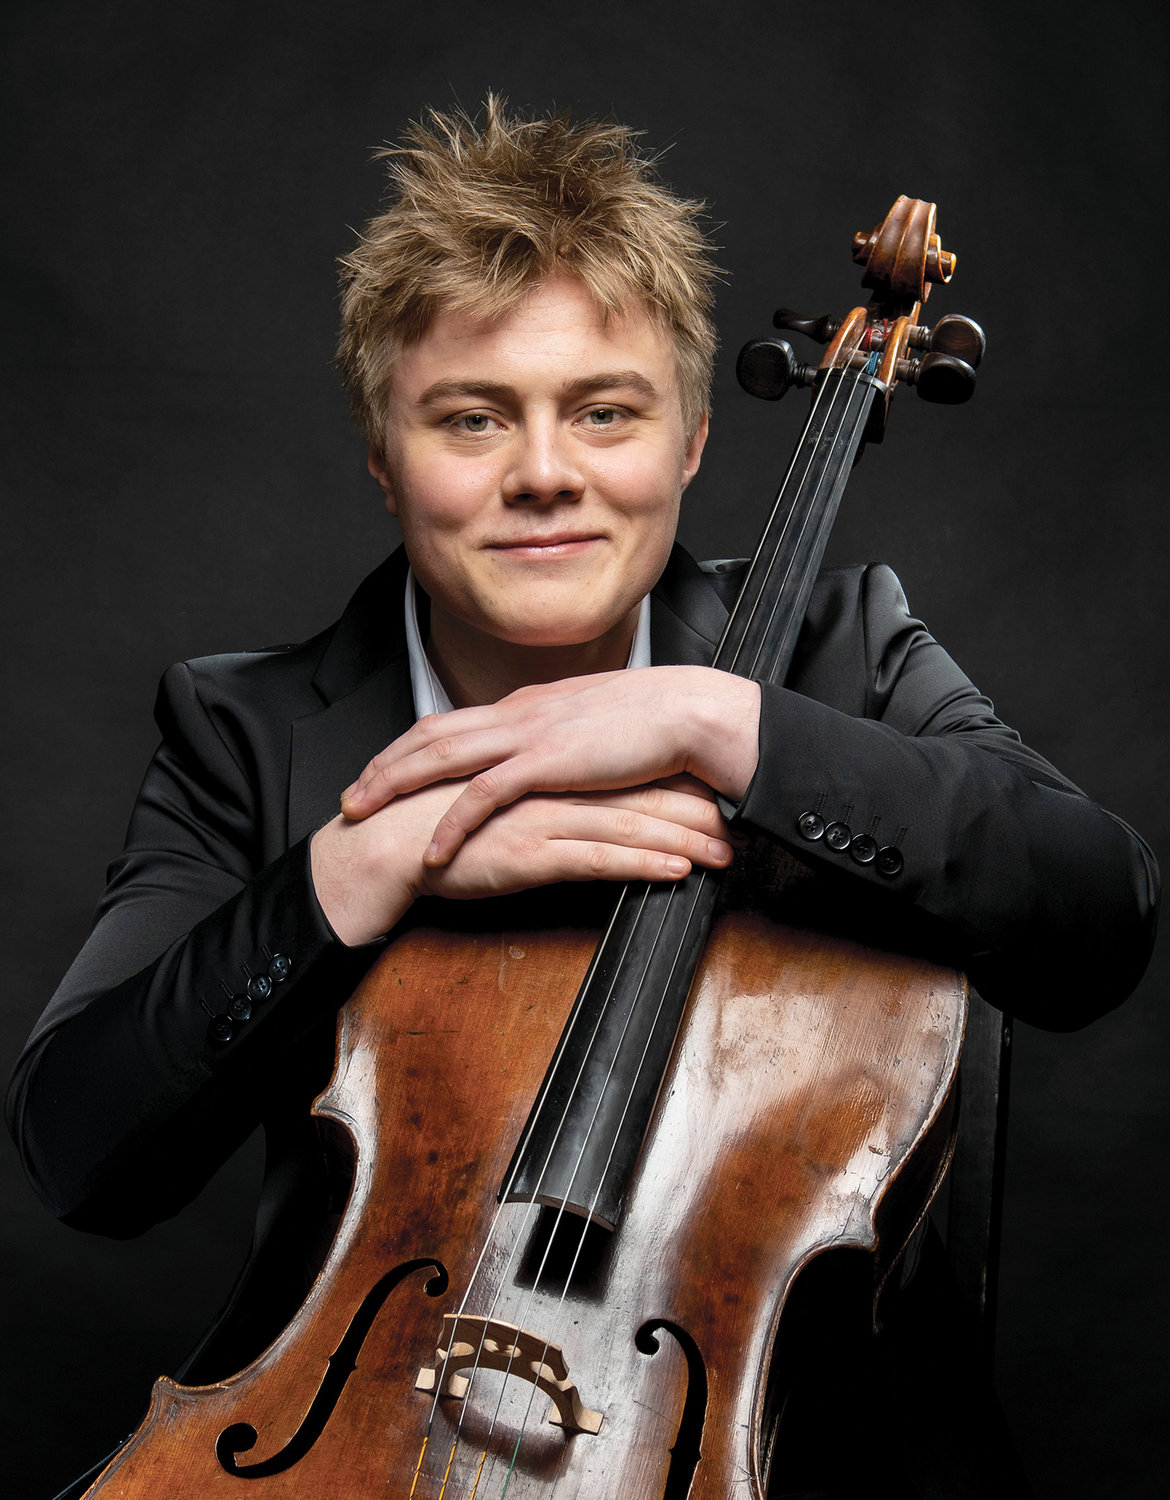 Jonathan Swensen, the 25-year-old Danish cellist and rising classical star, joins the Mobile Symphony Orchestra for Tchaikovsky’s Rococo Variations.